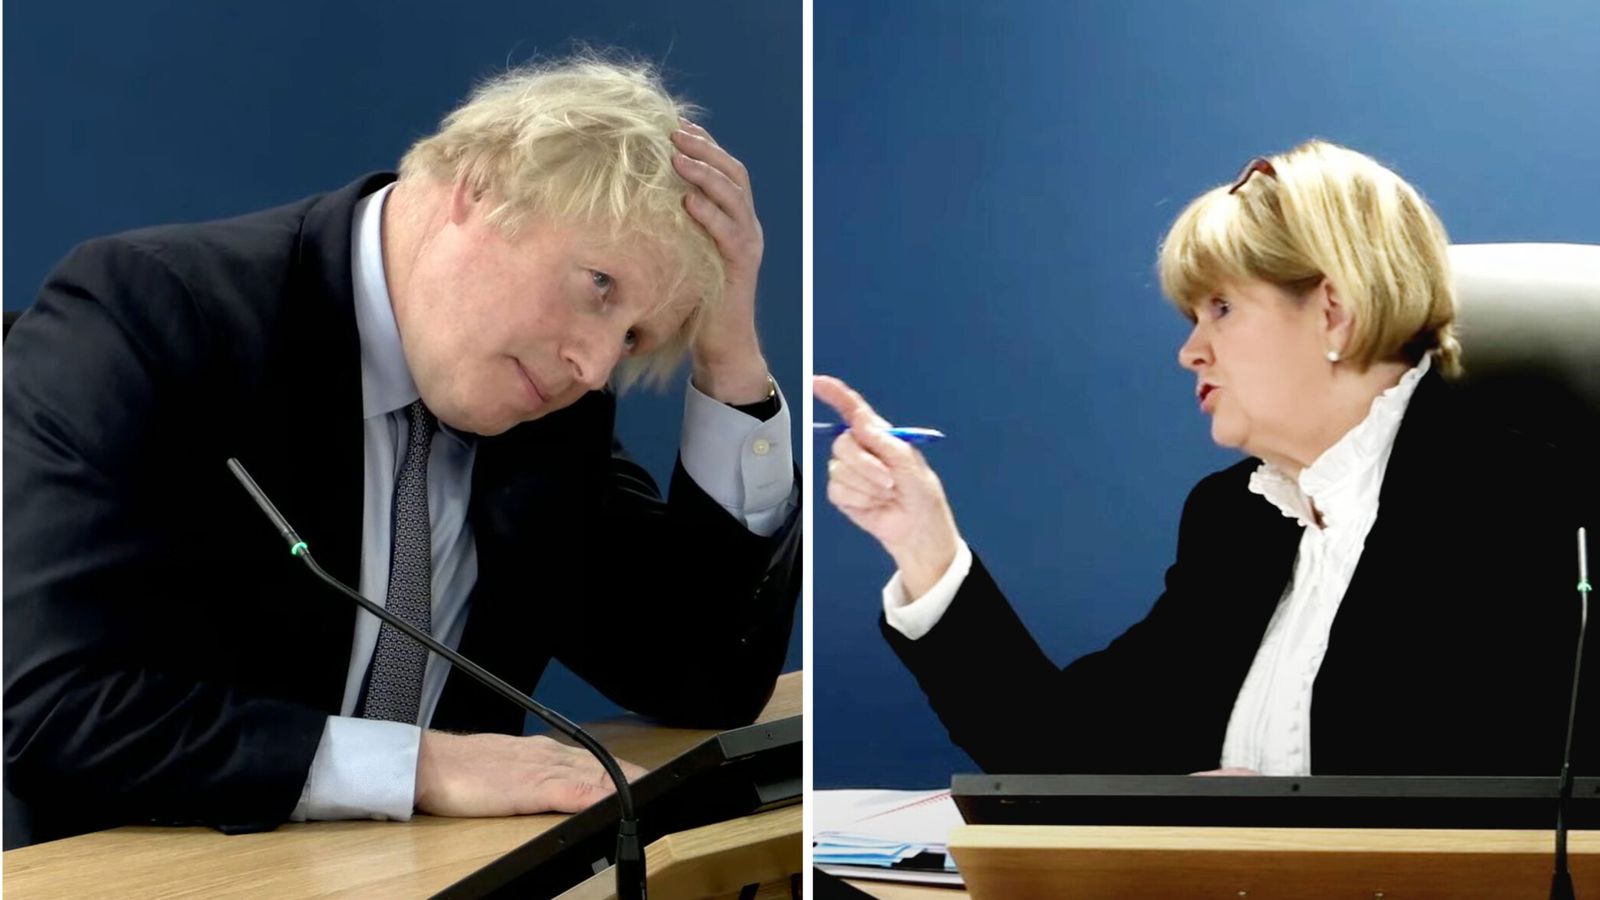 People removed from COVID inquiry as Boris Johnson apologises for 'pain and suffering'